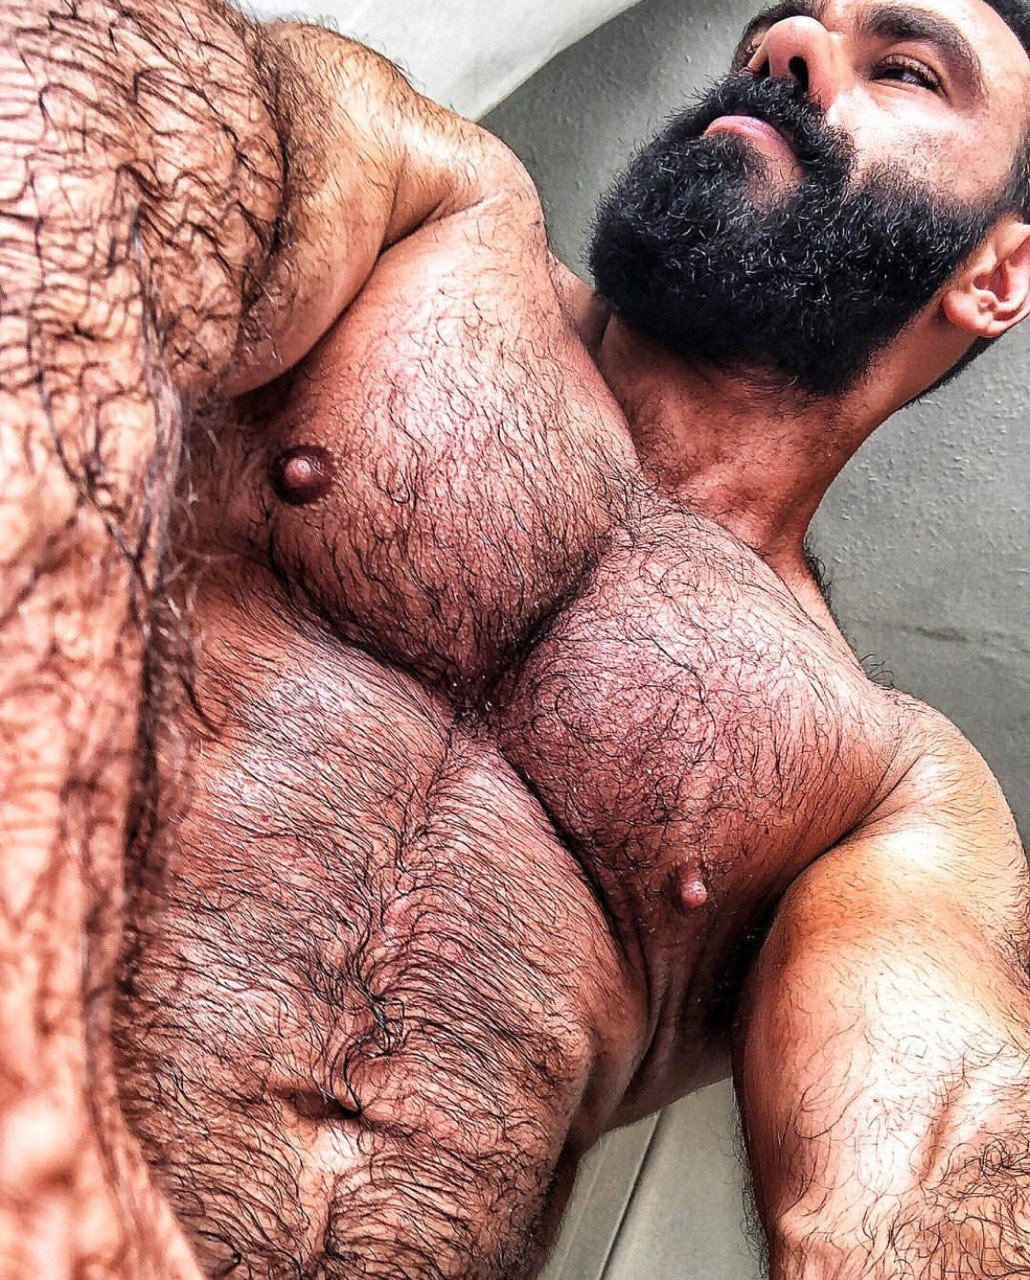 Photo by Smitty with the username @Resol702,  January 15, 2020 at 7:42 PM. The post is about the topic Gay Hairy Men